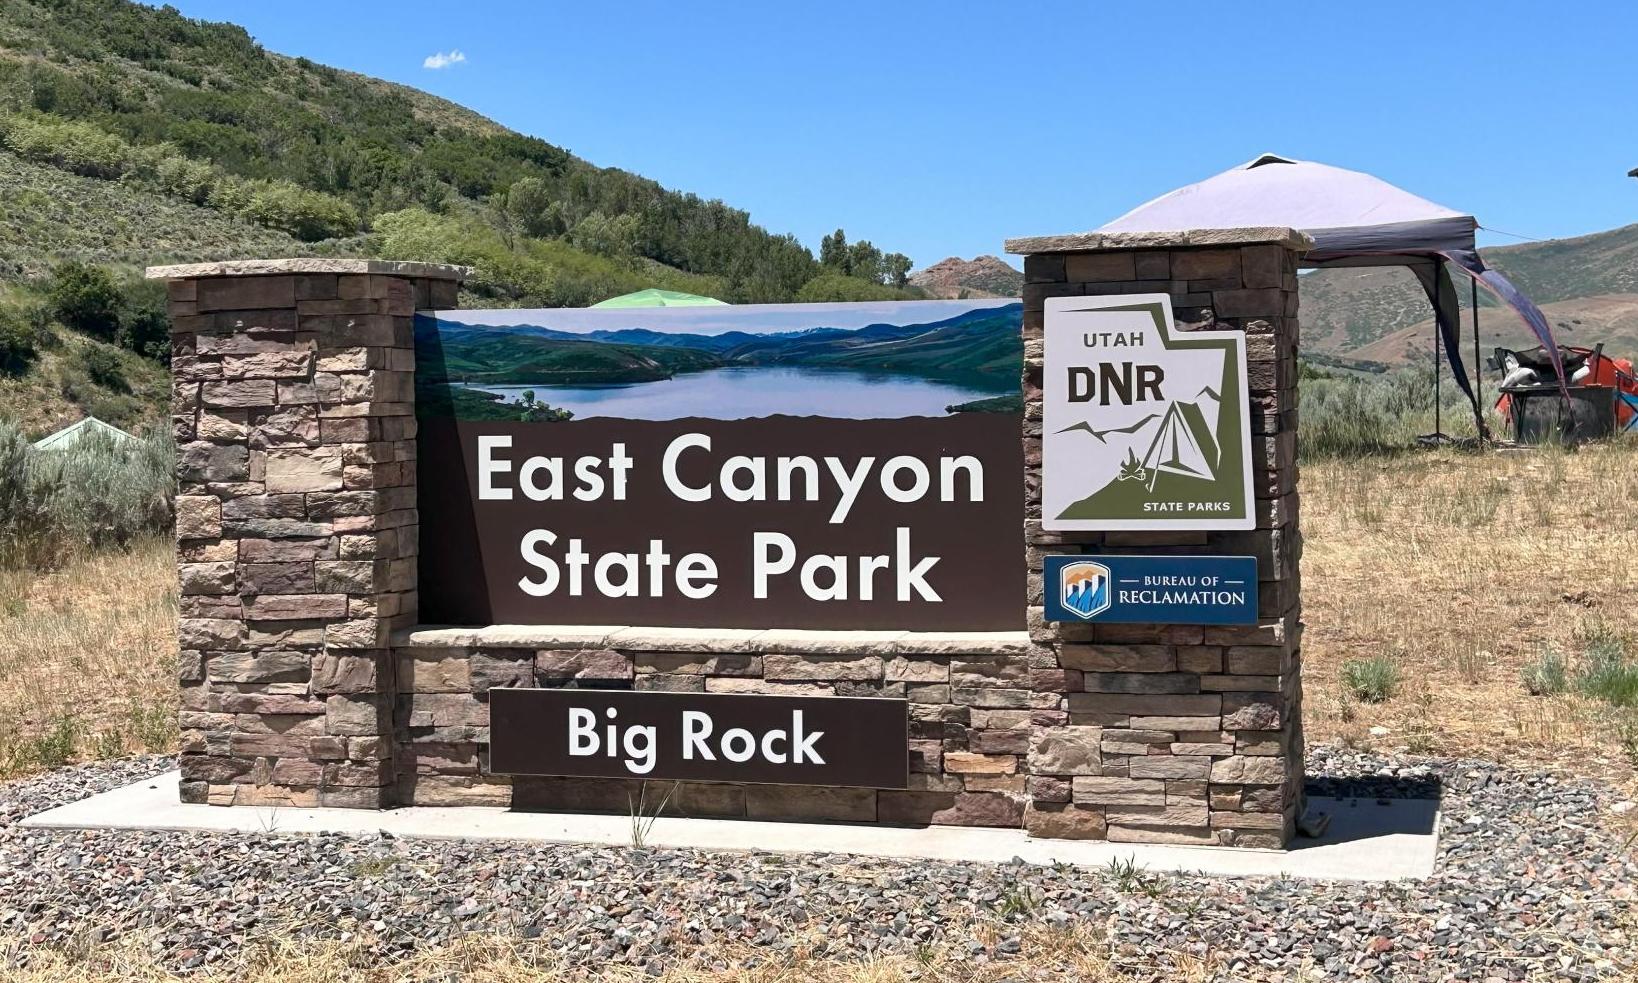 East Canyon State Park: Big Rock Campground